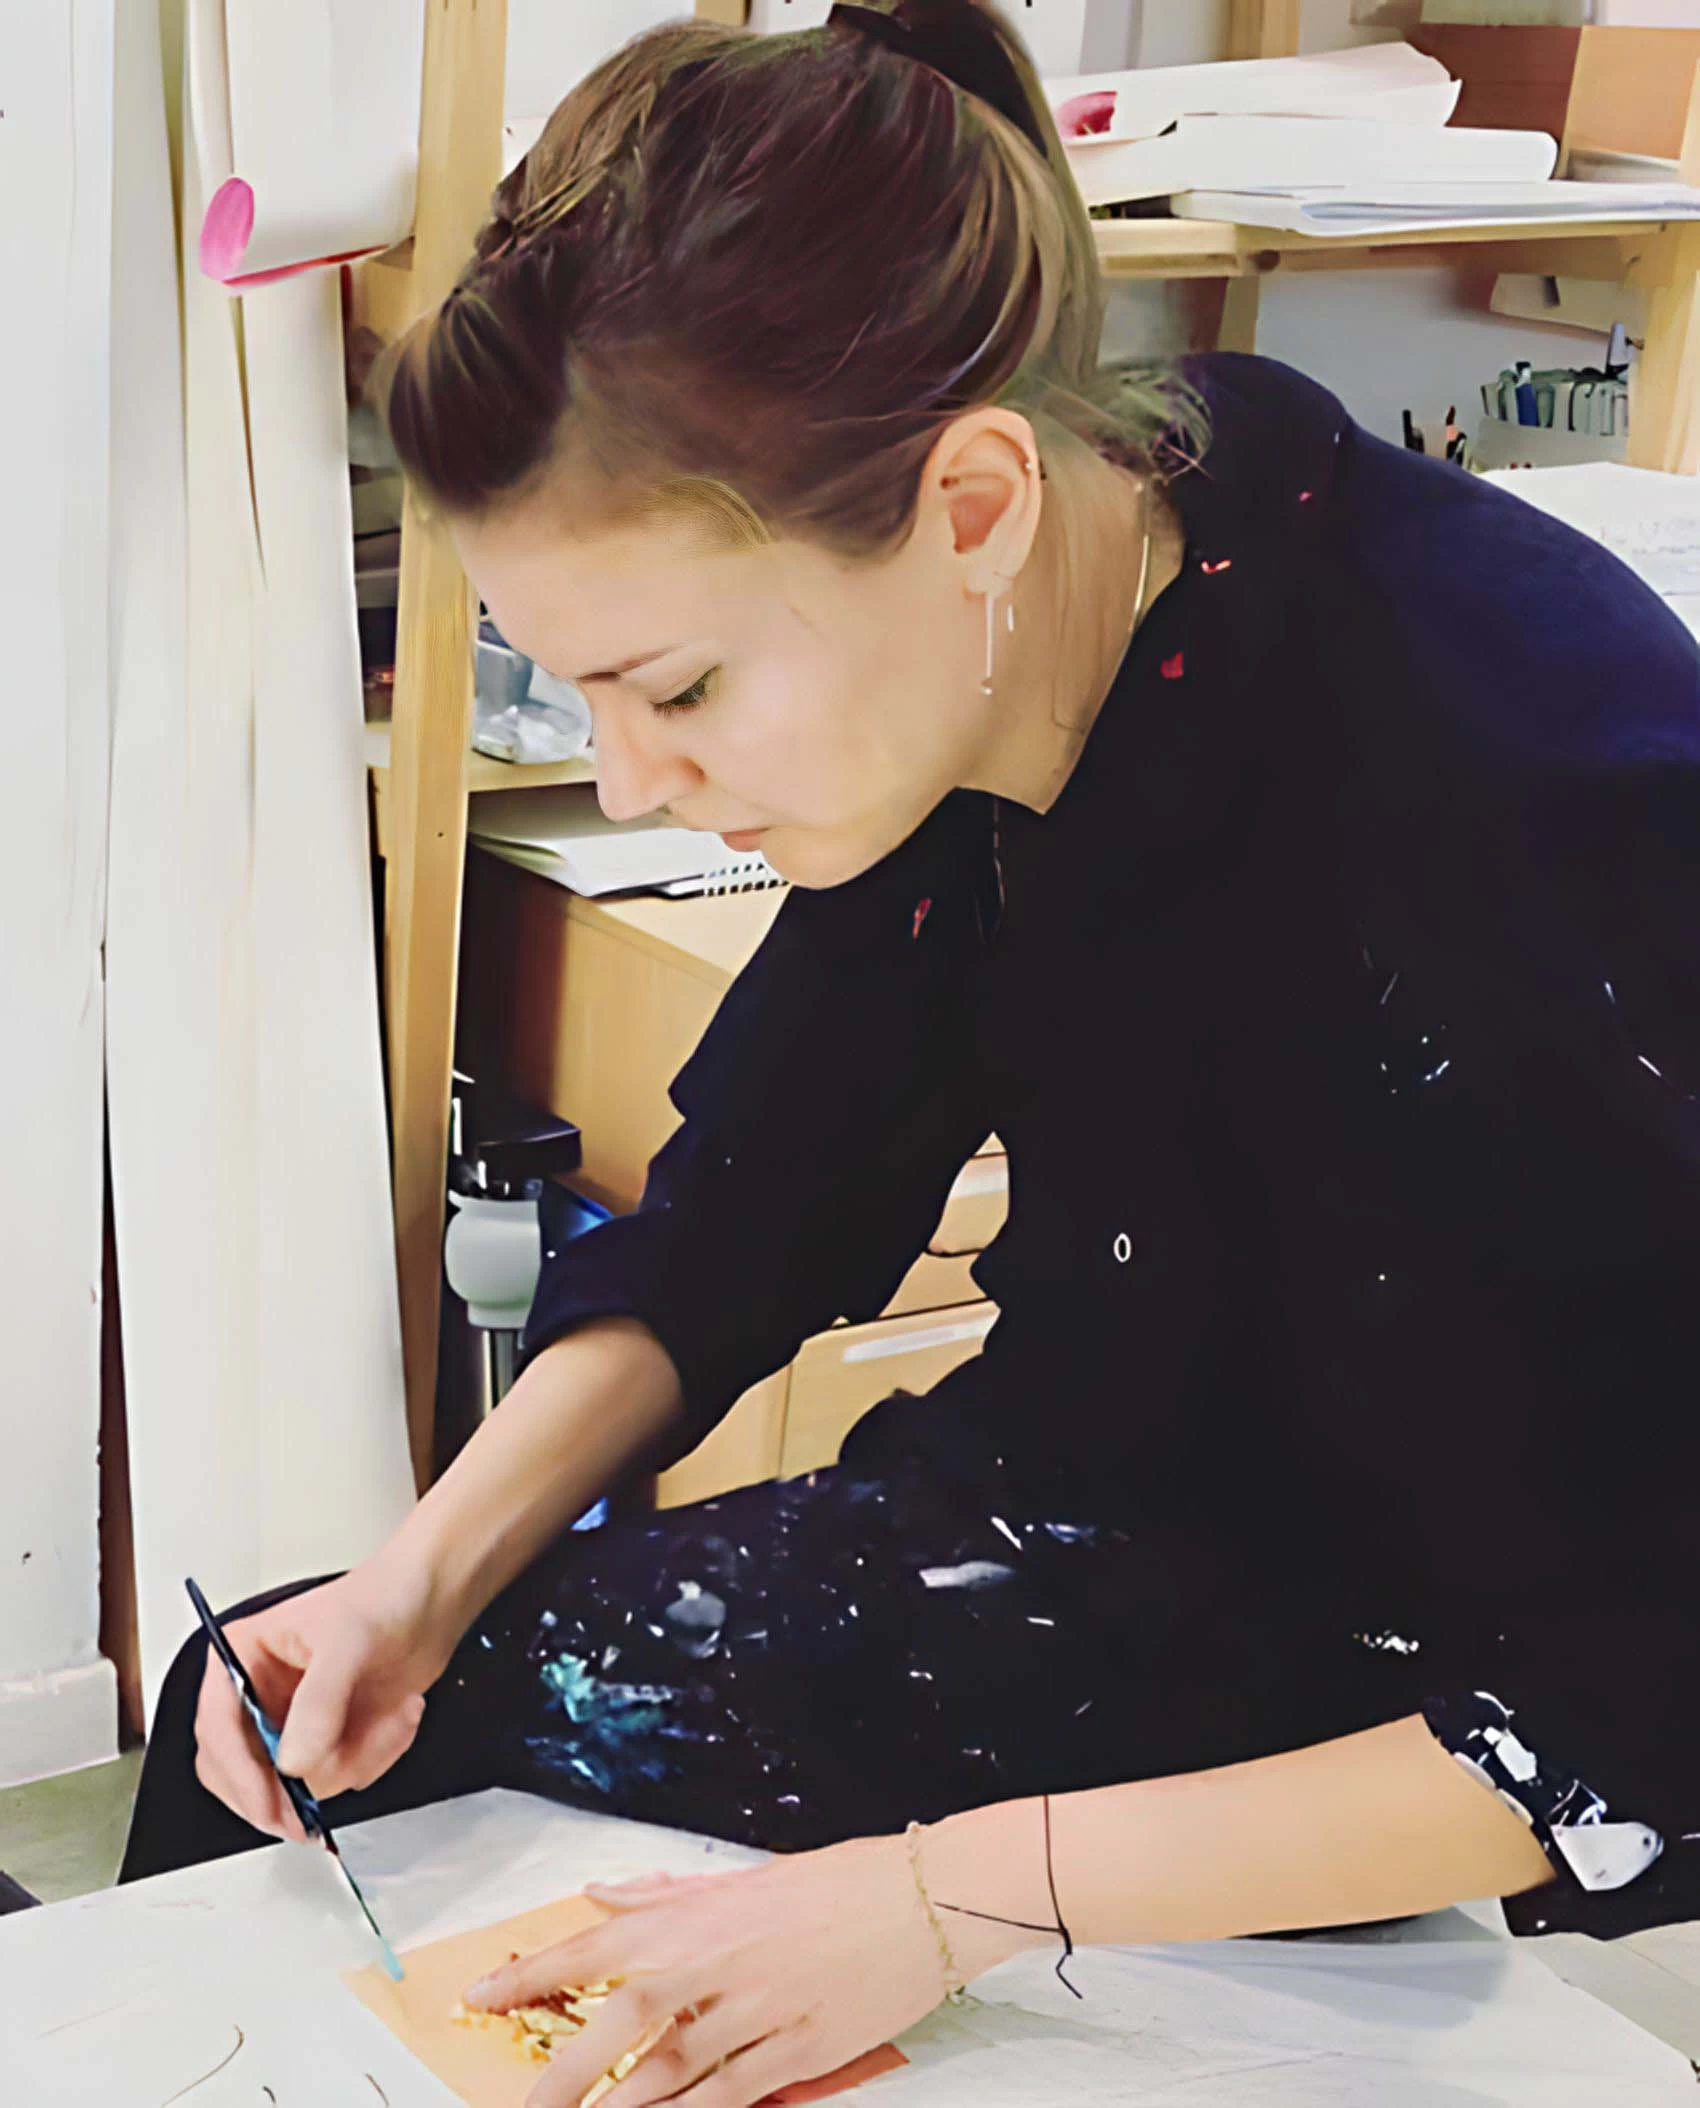 Fiona biddington sits in her studio and adds gold leaf to some work